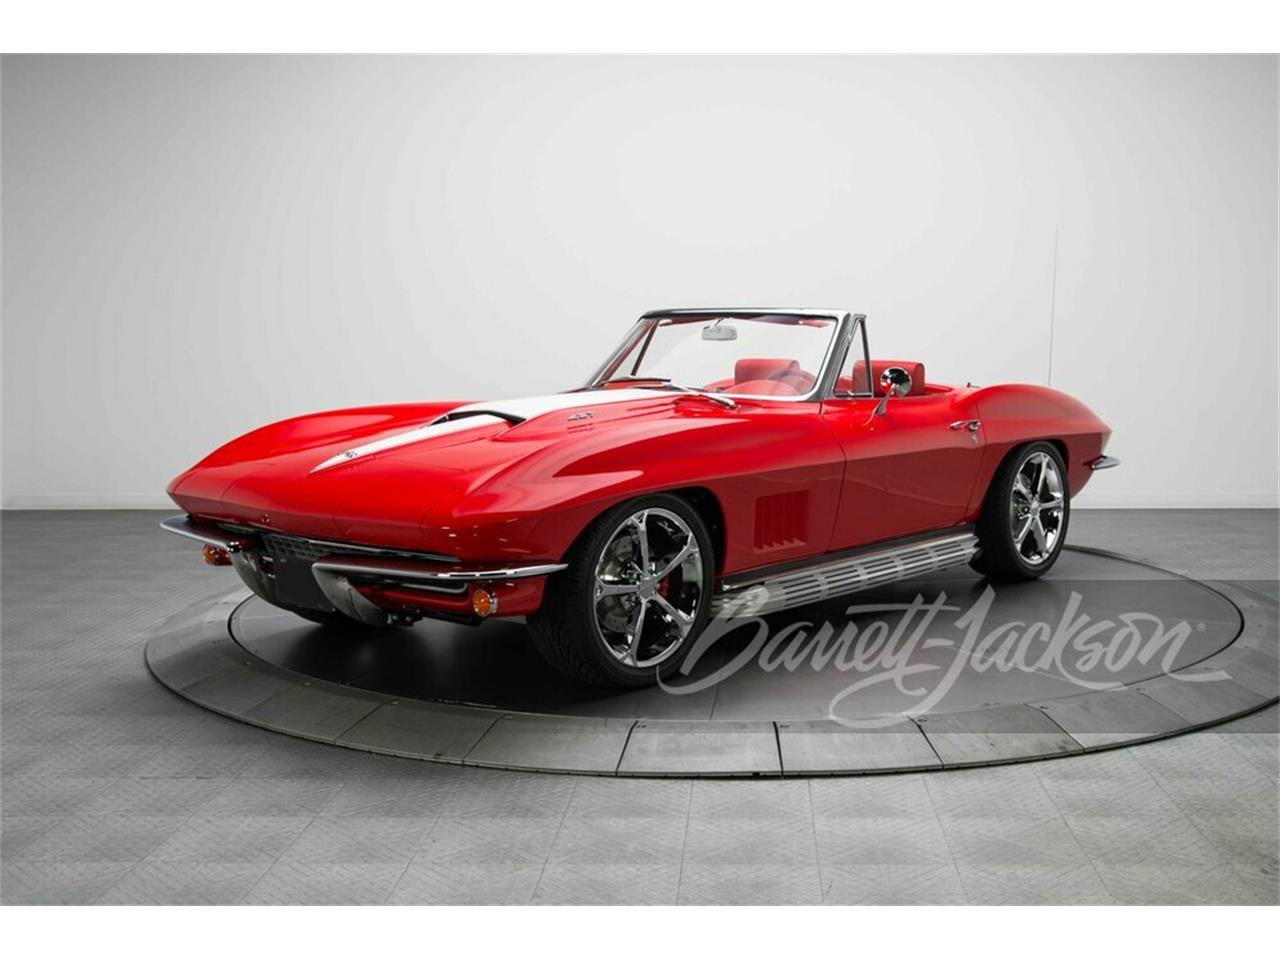 For Sale at Auction: 1963 Chevrolet Corvette in Scottsdale, Arizona for sale in Scottsdale, AZ